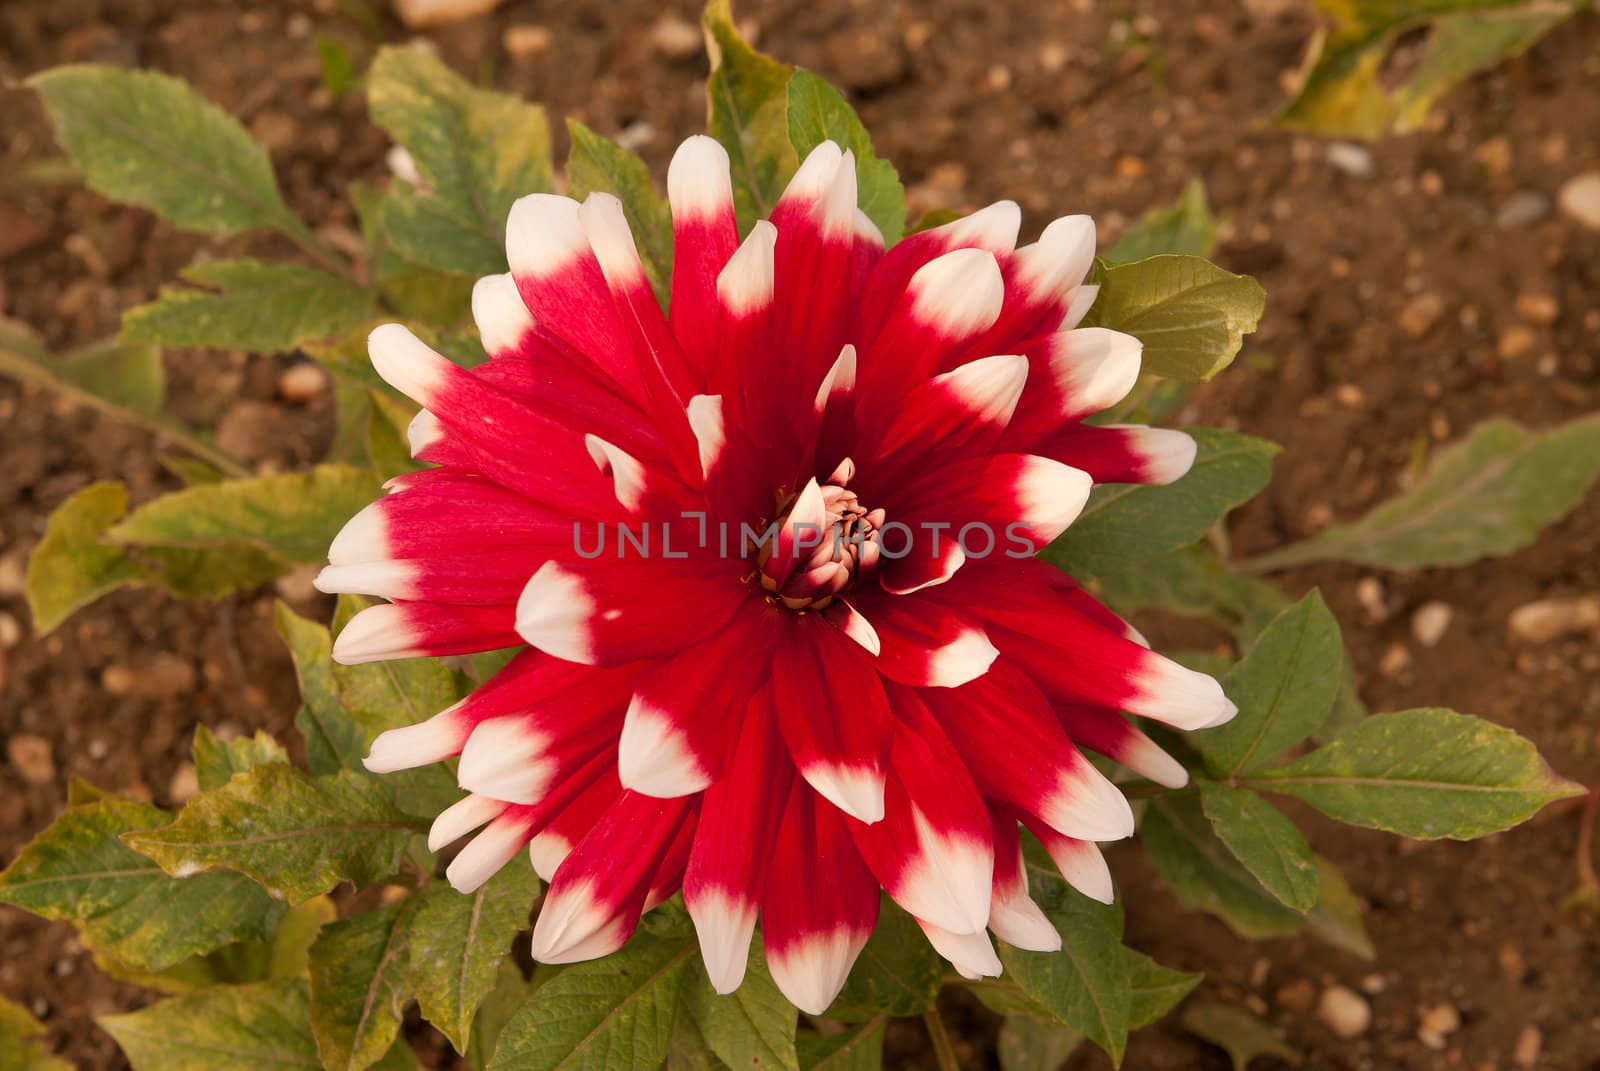 Beautiful stunning dahlia flowering in the garden. Is part of the daisy family like well drained humus rich soils.